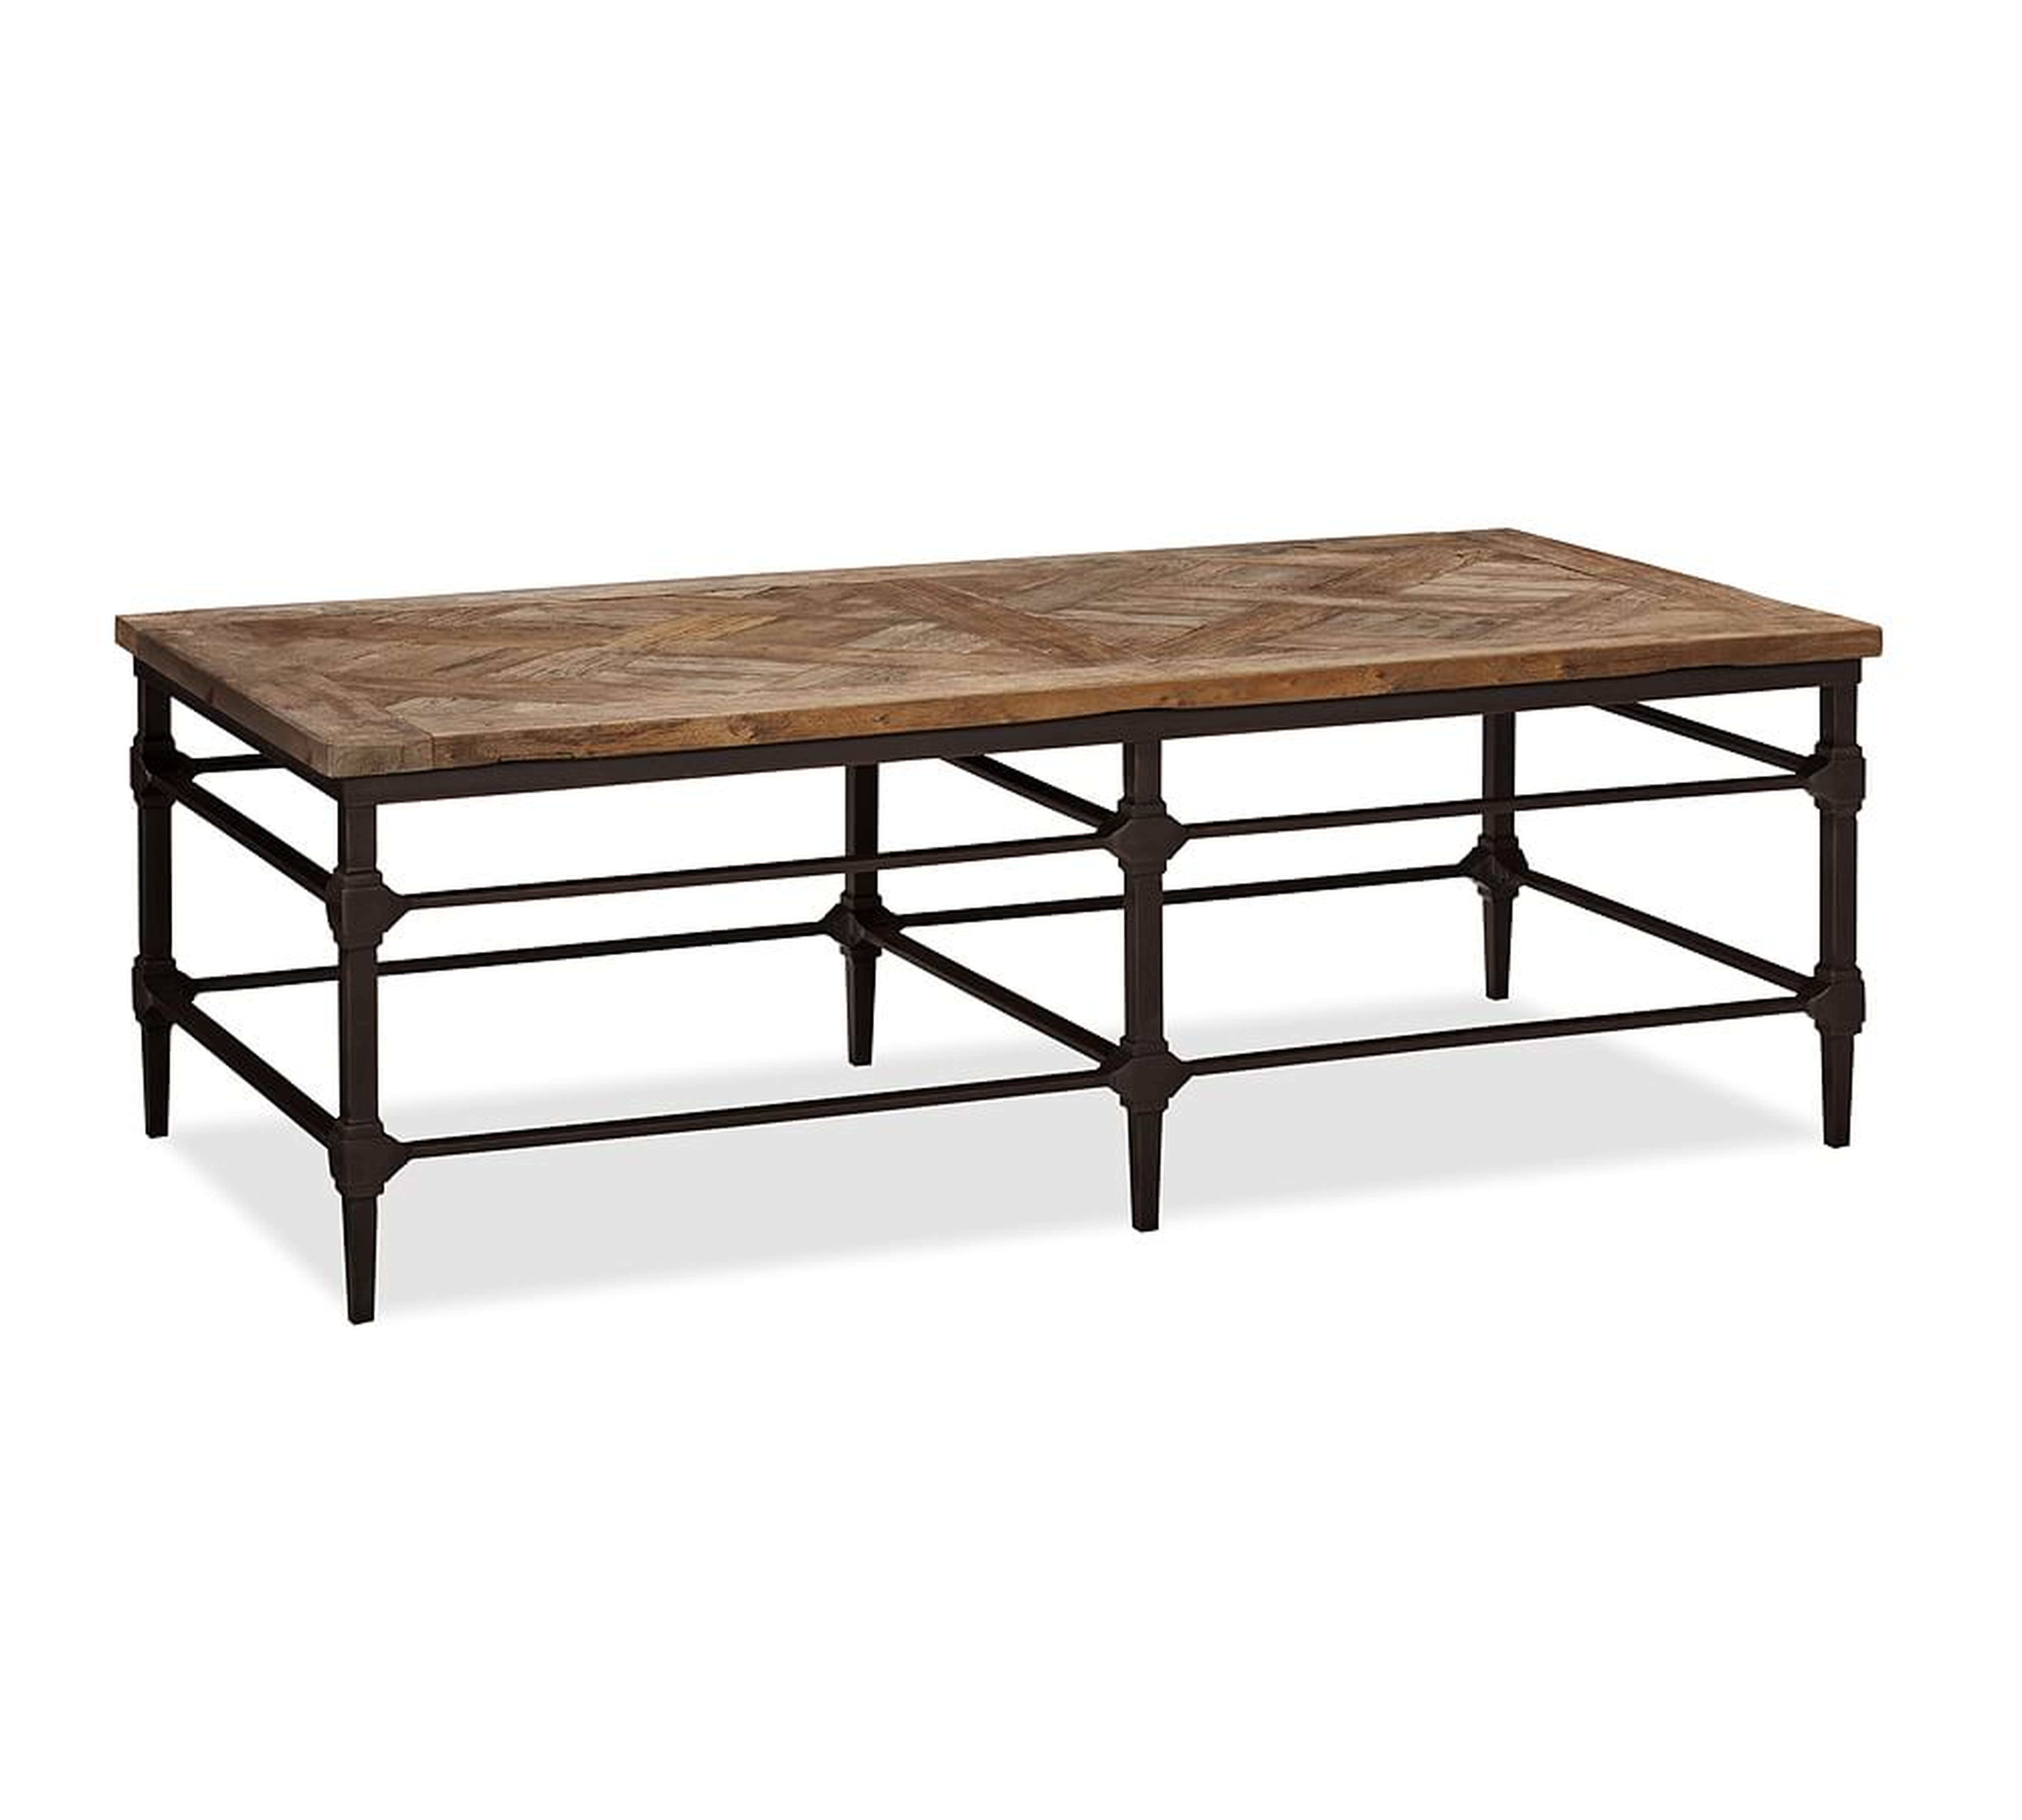 Parquet Reclaimed Wood & Metal Rectangular Coffee Table, 54"L - Pottery Barn